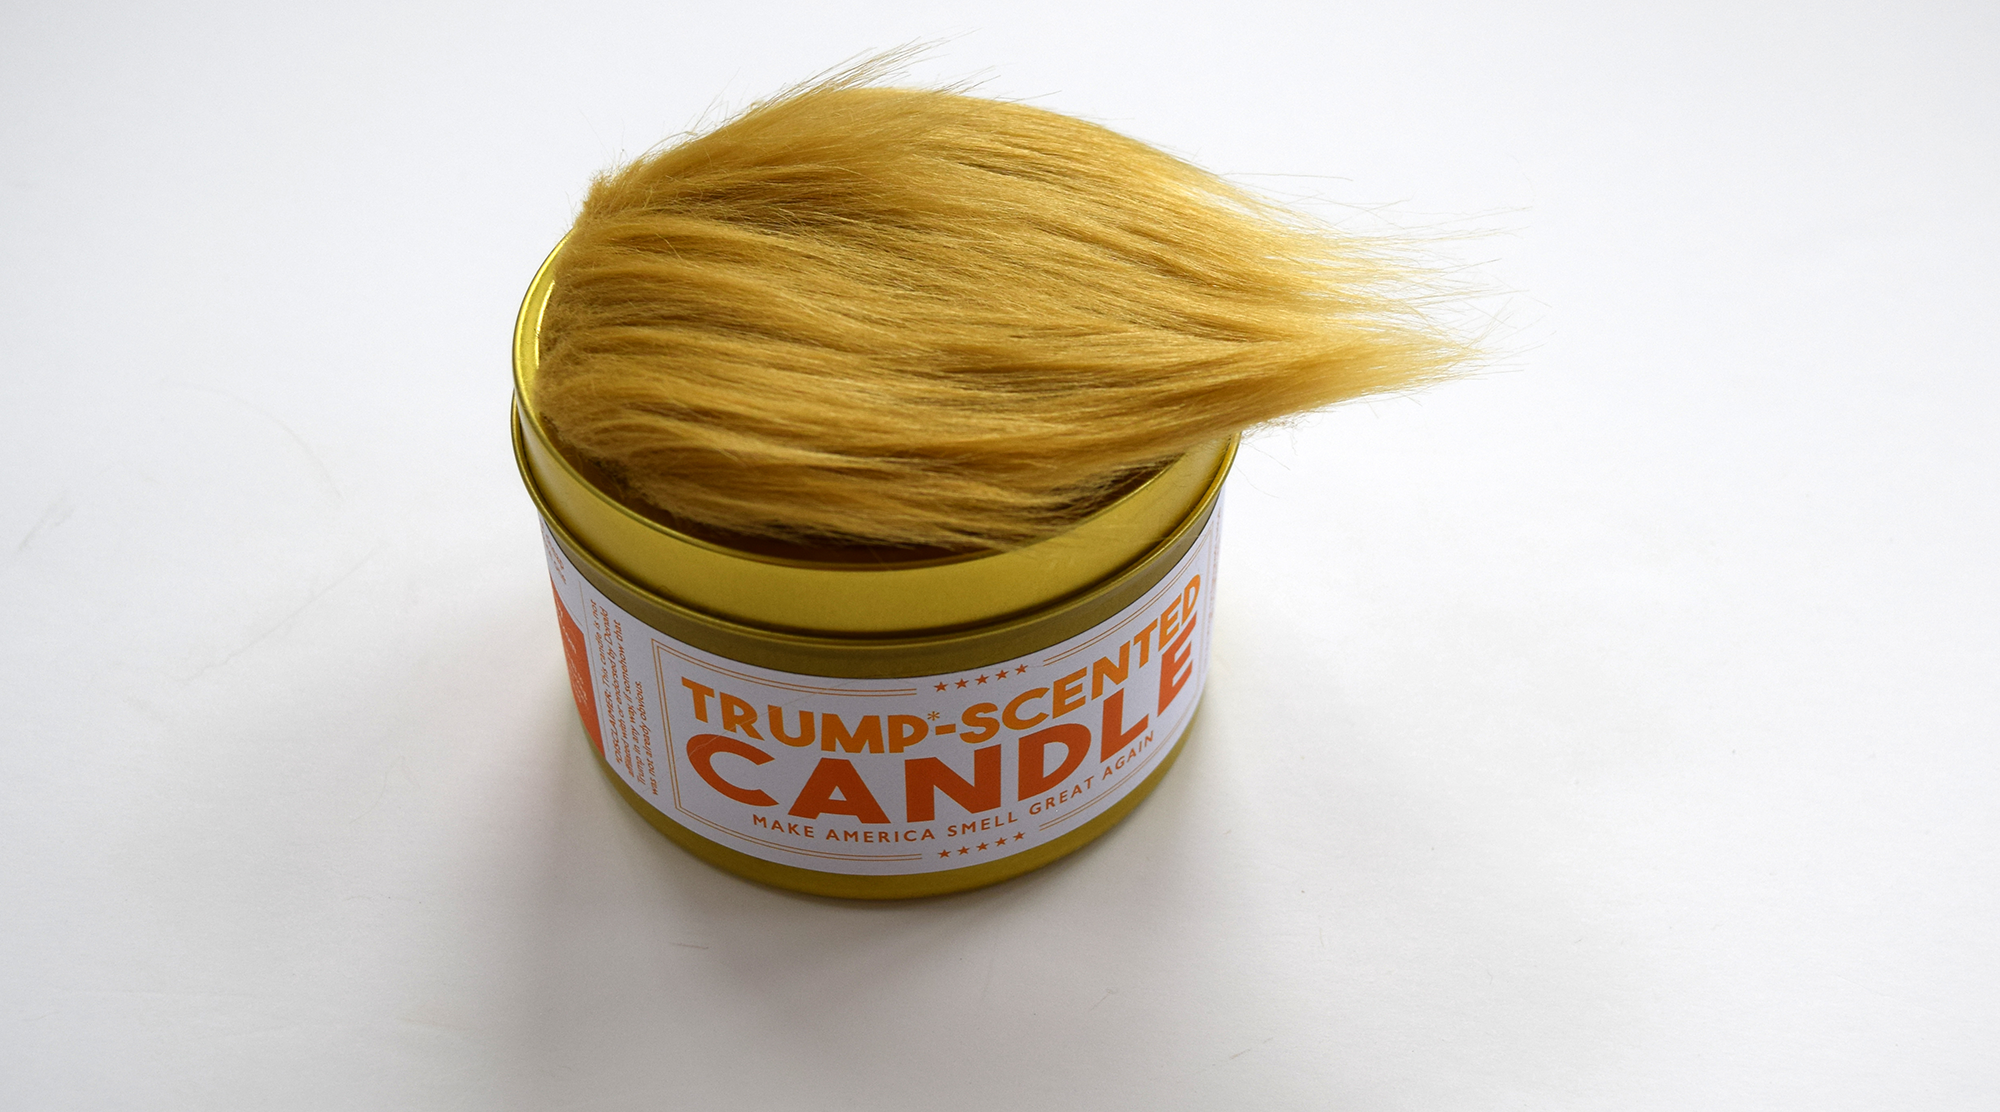 Trump candle - top.png